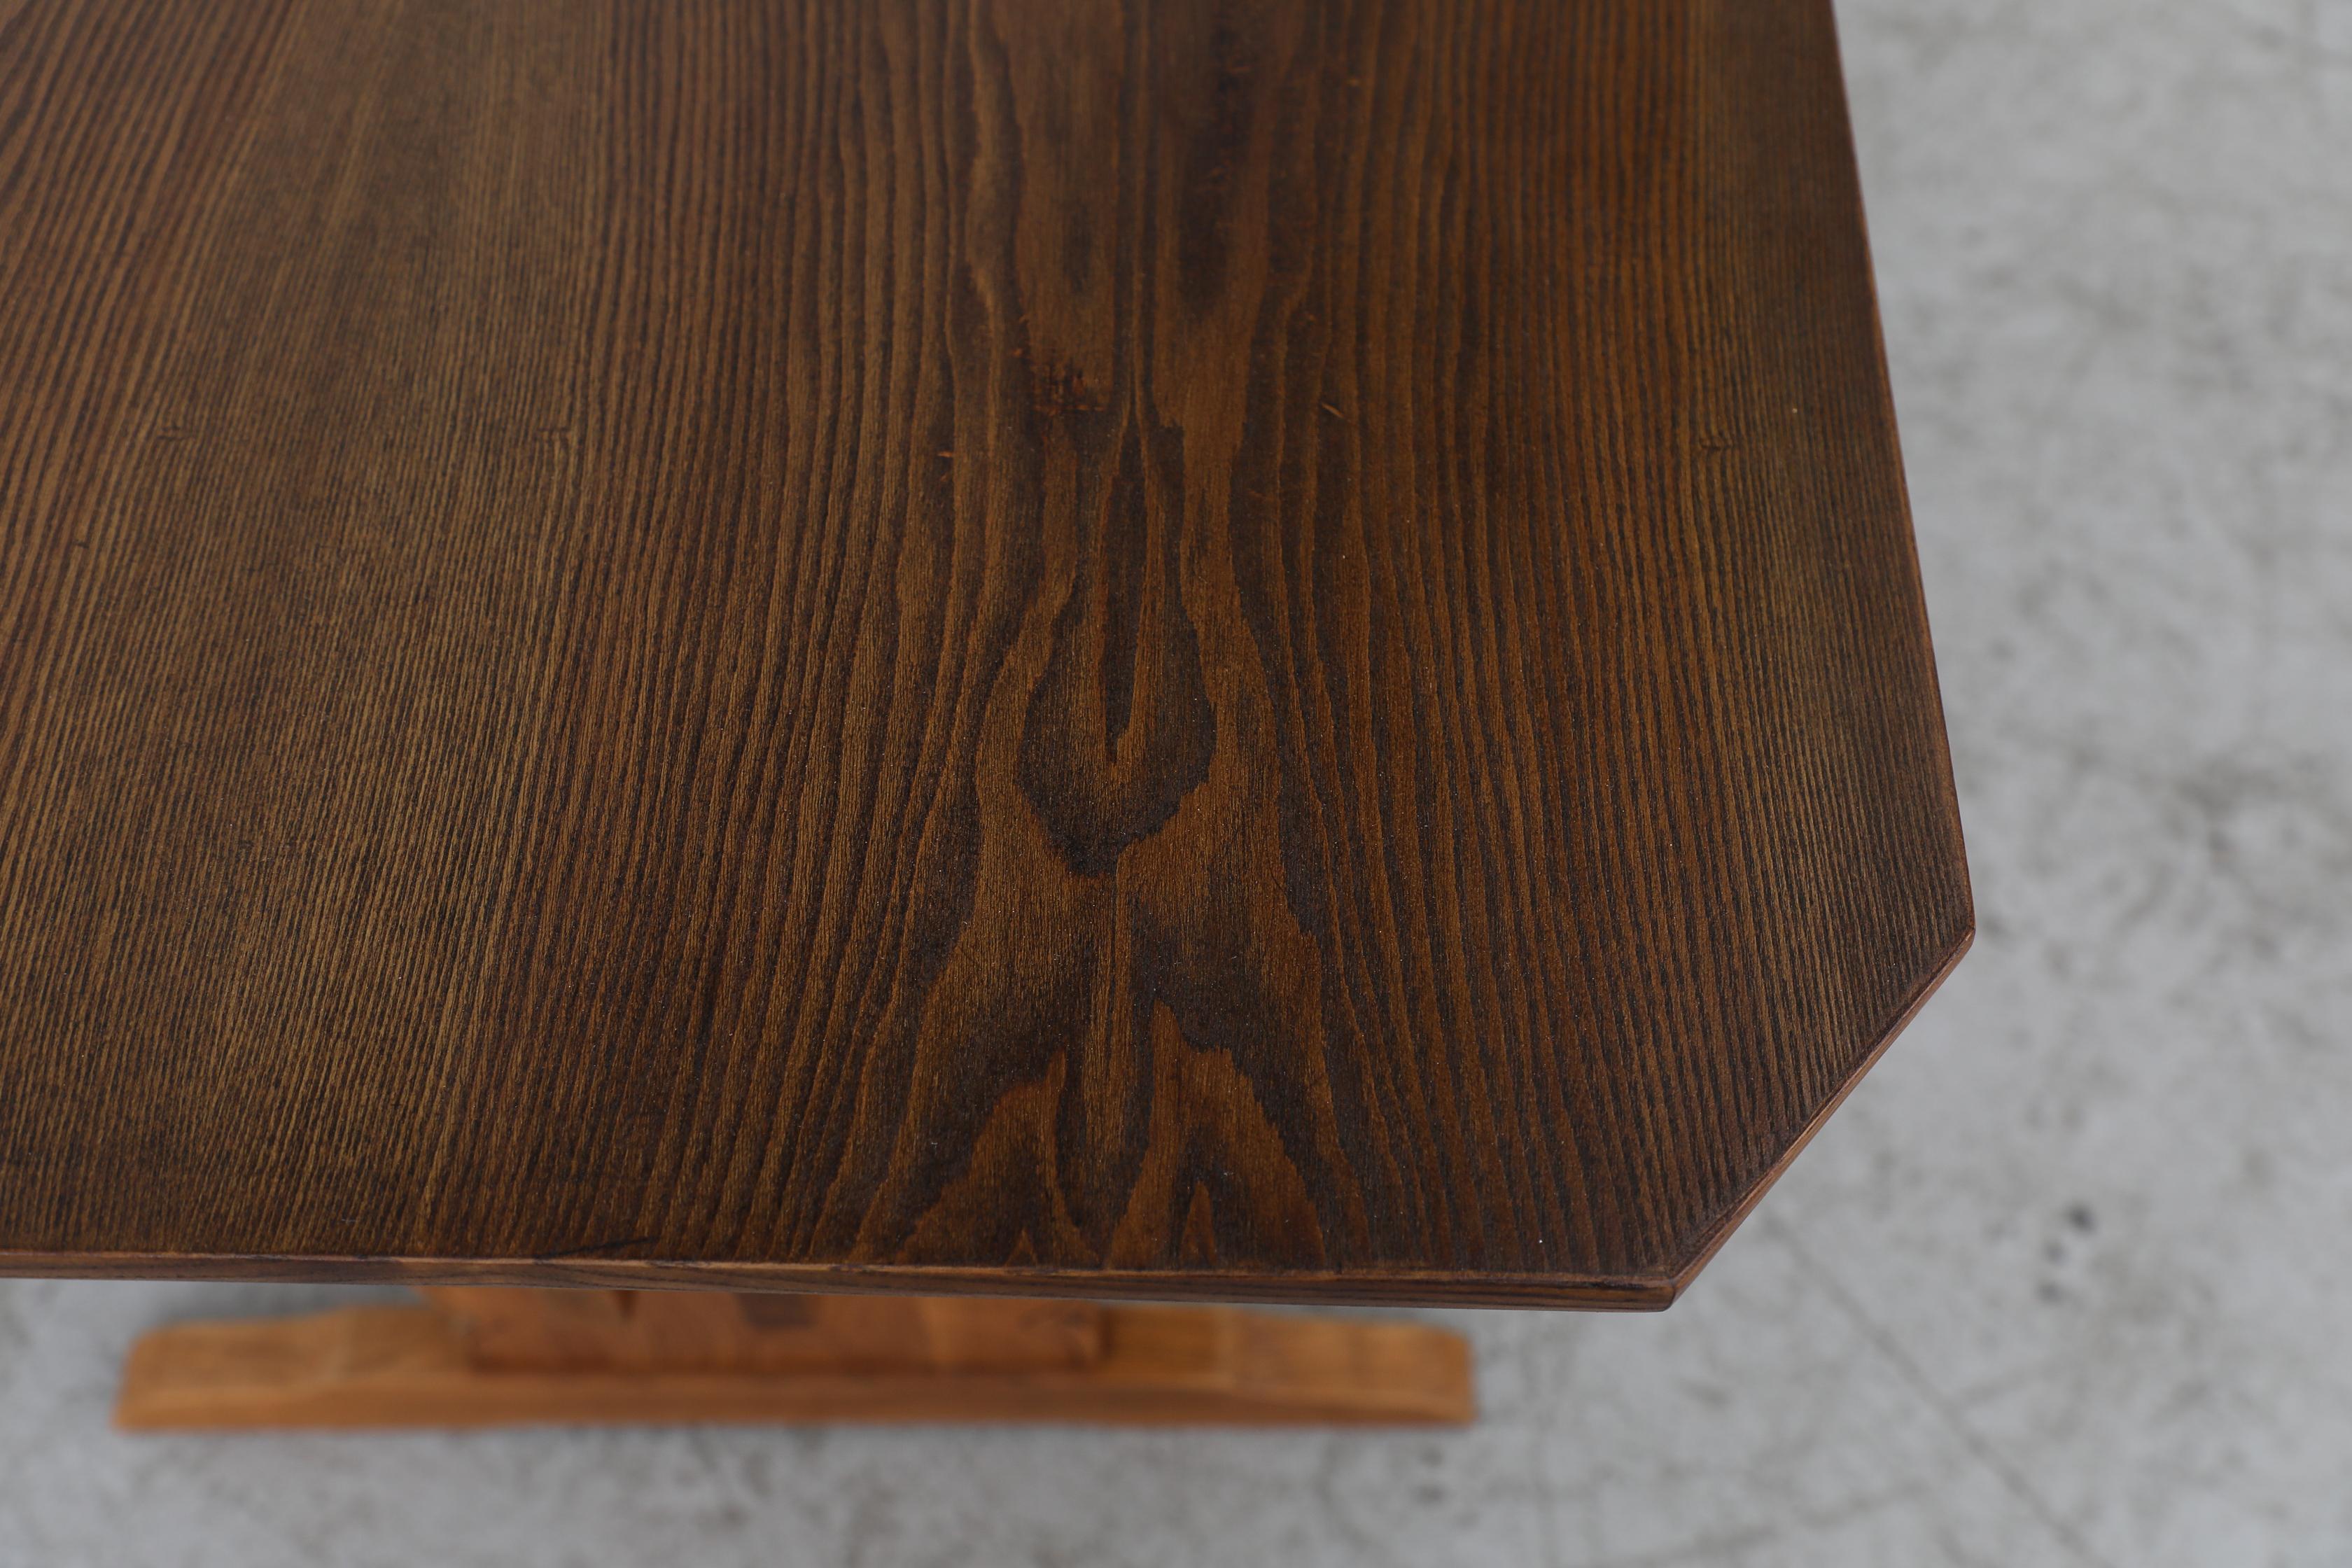 Austrian Ornate Brutalist Tyrolean Style Dark Pine Table with Angled Corners For Sale 3